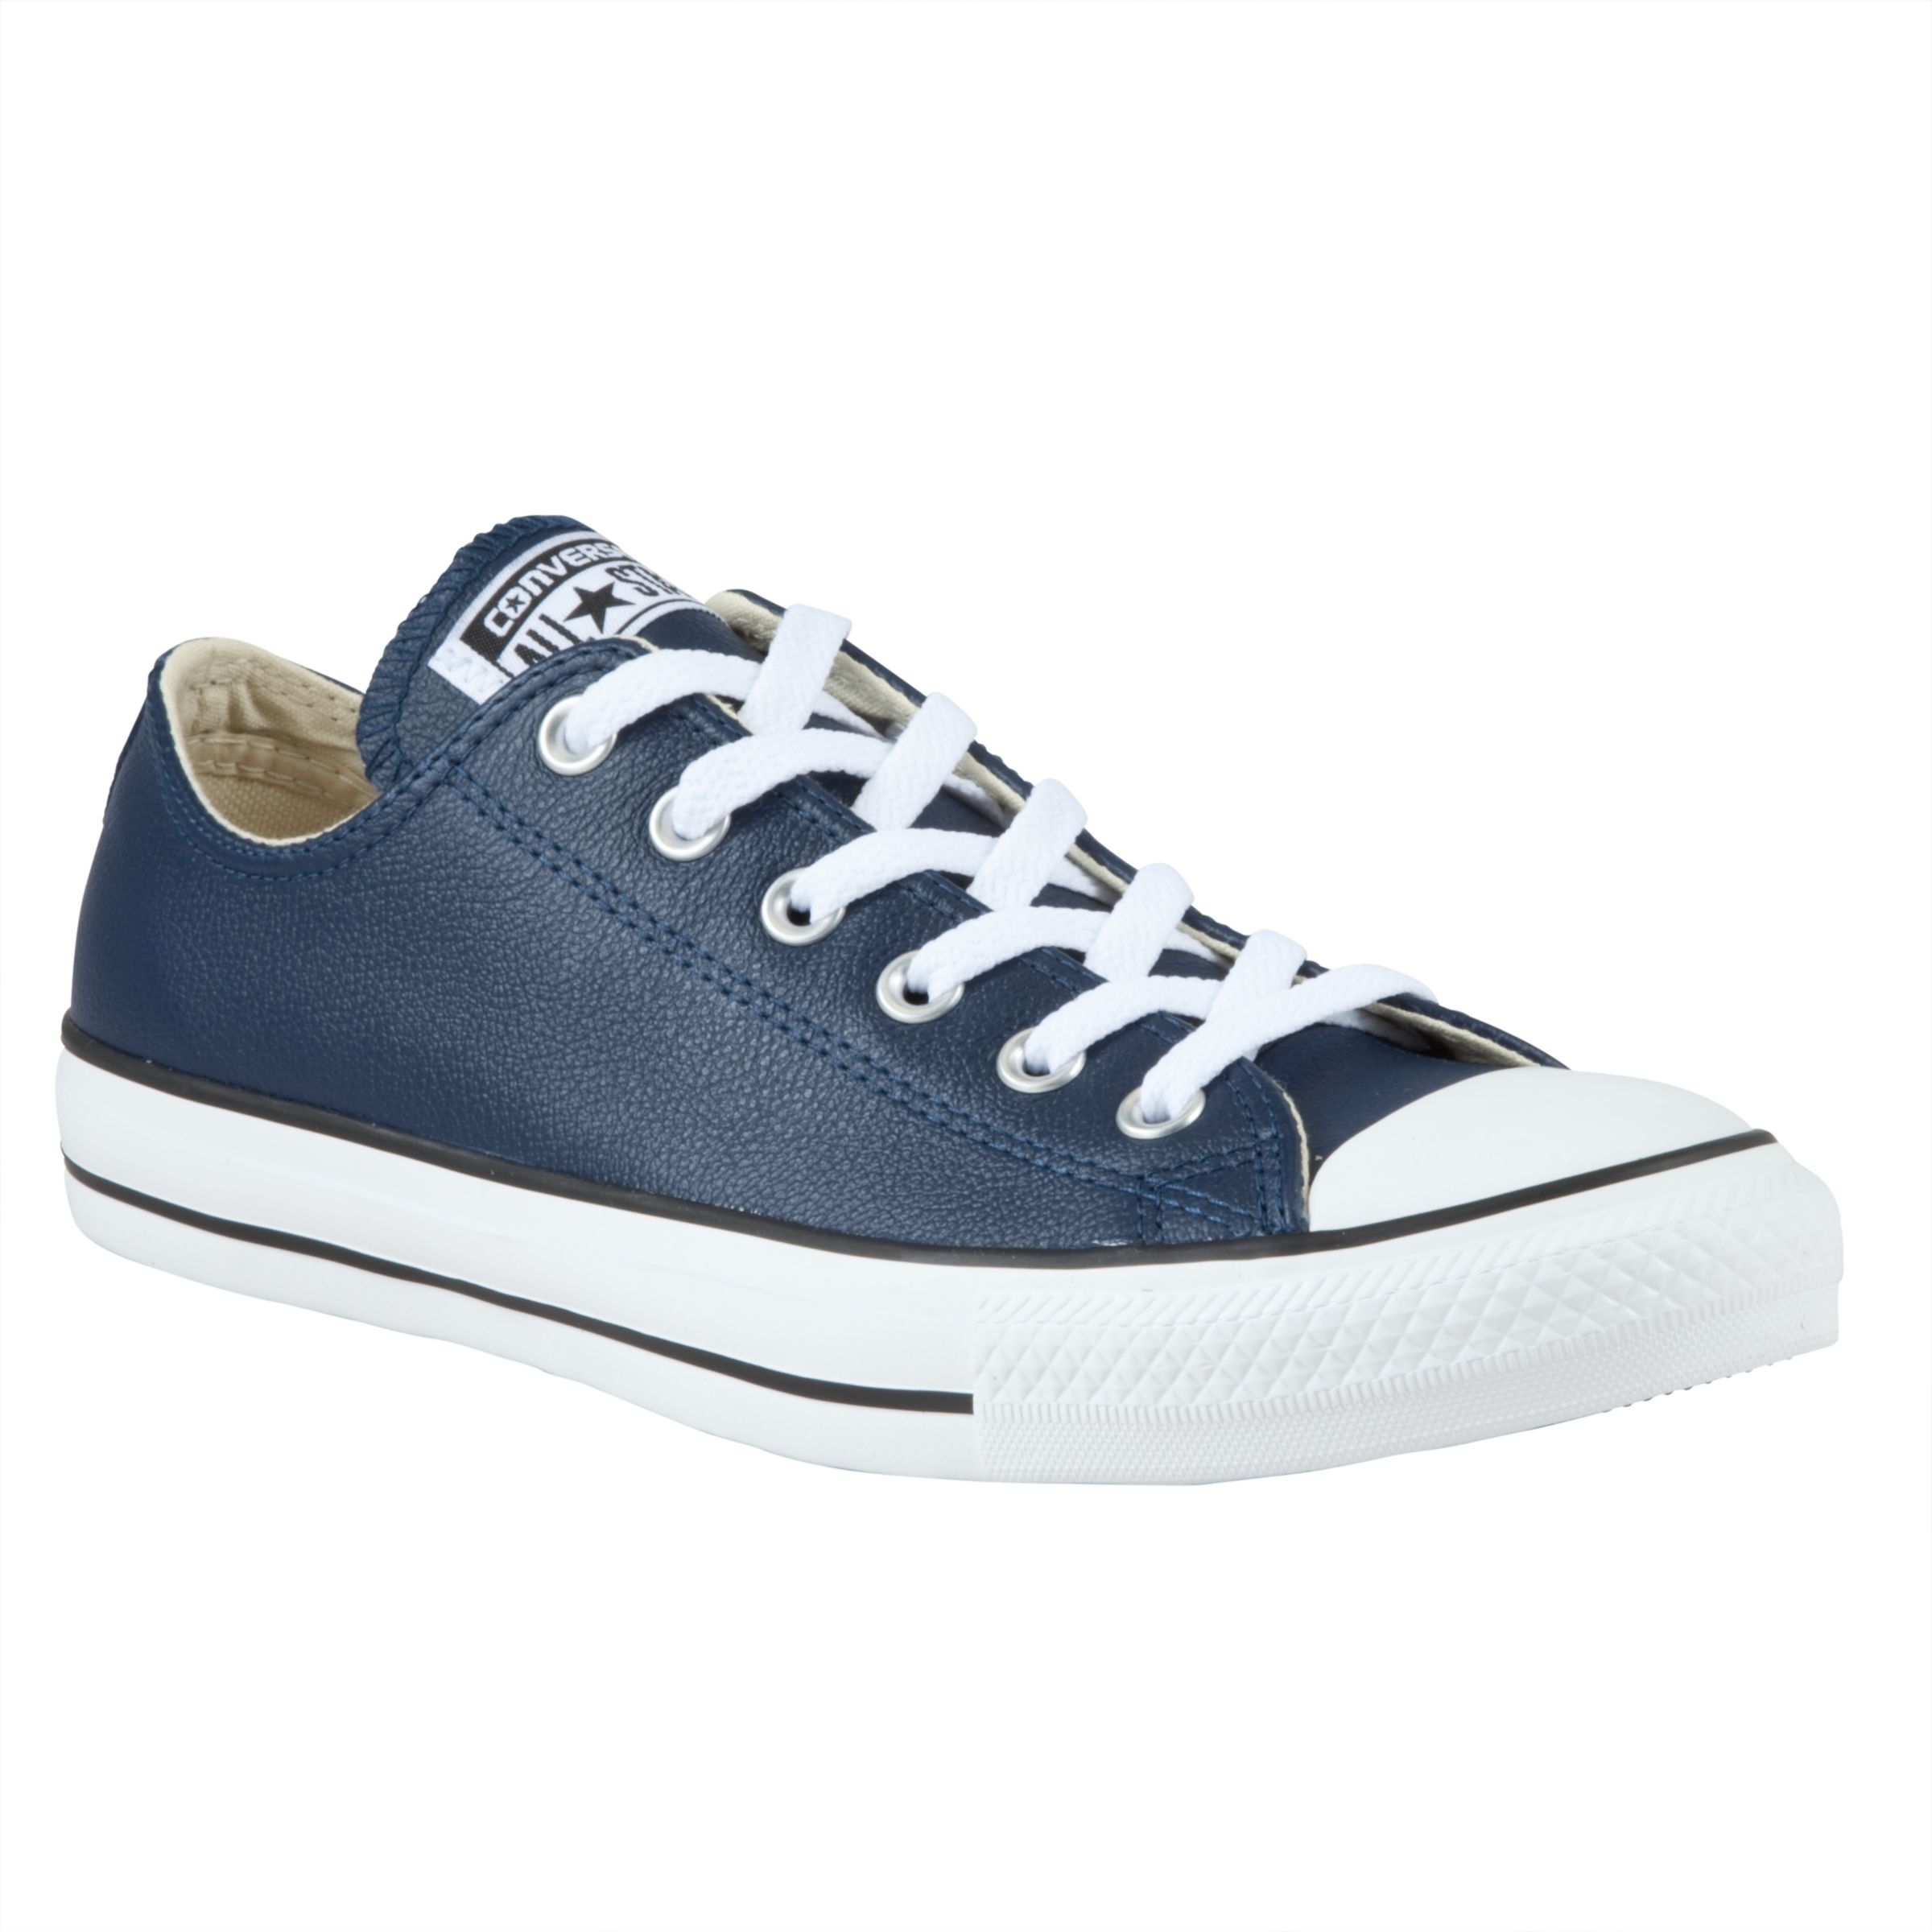 Chuck All Star Leather Trainers,